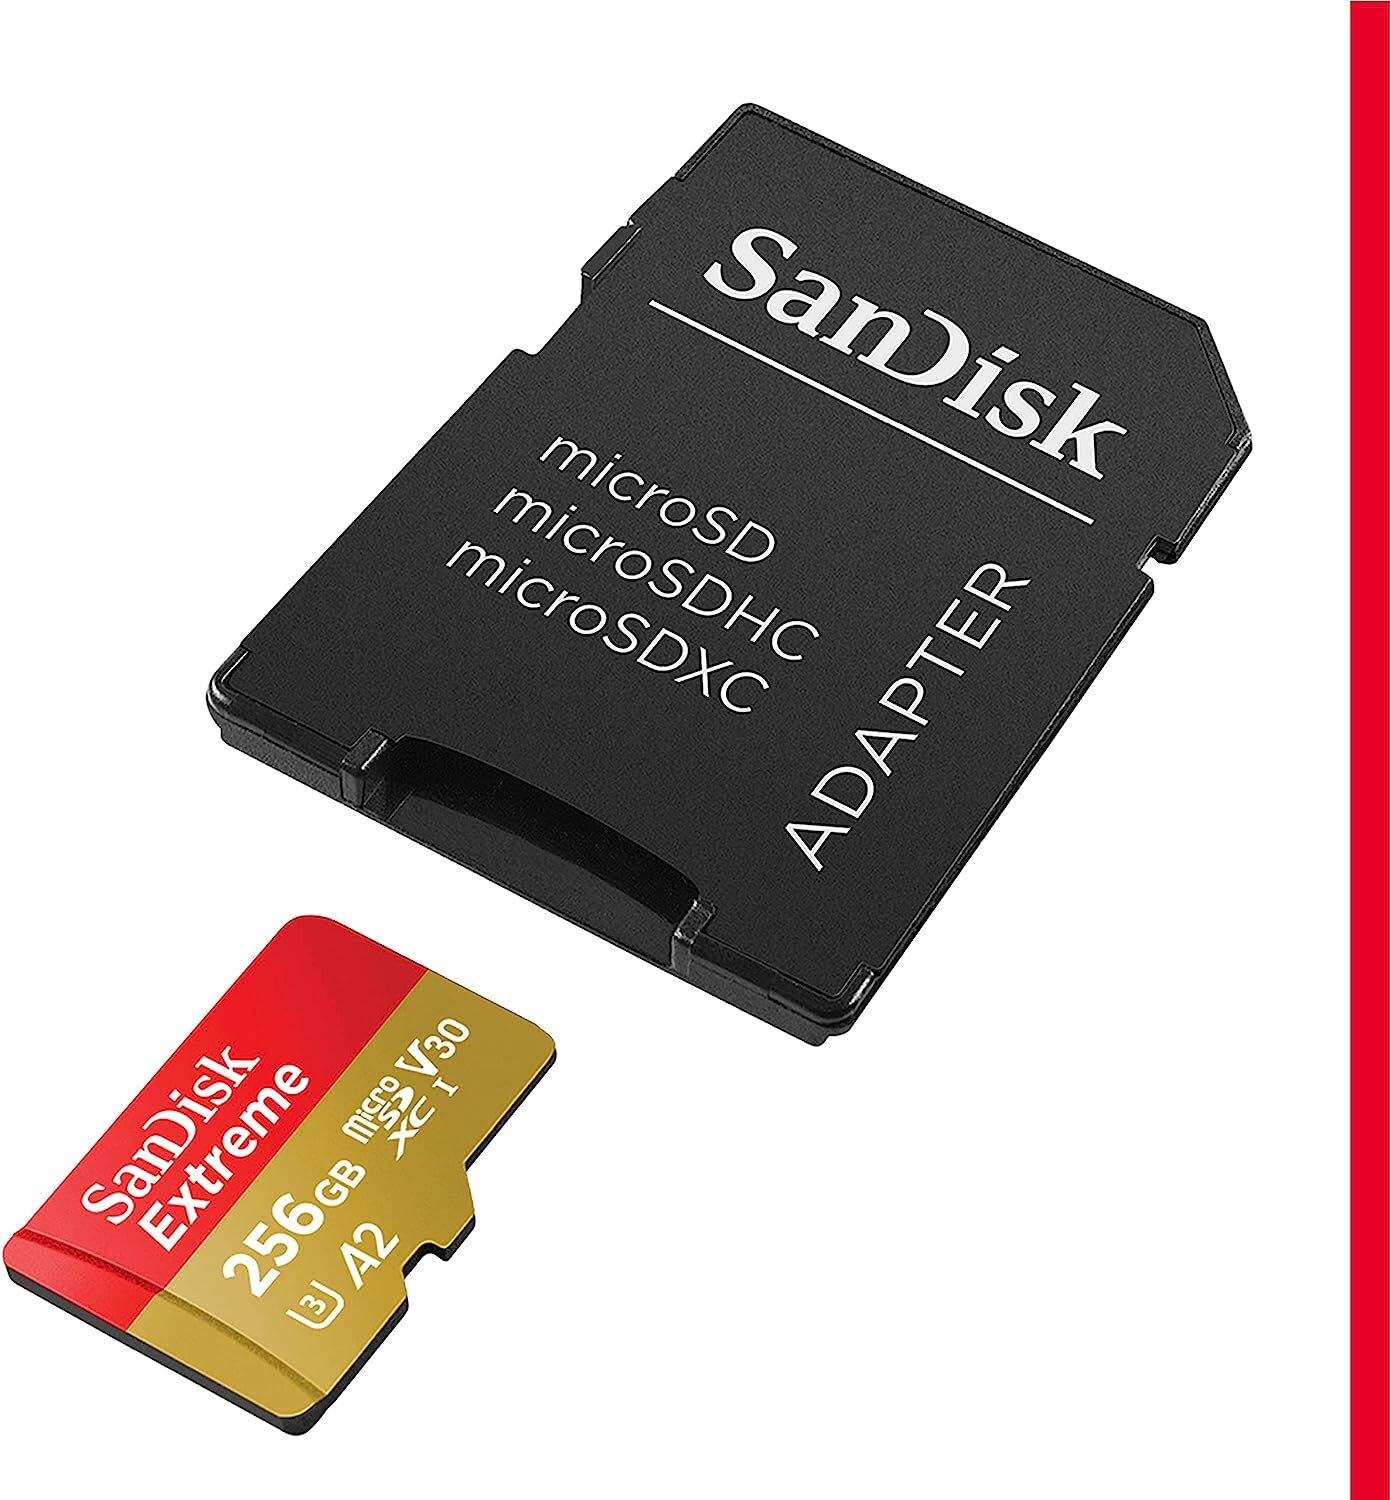 Sandisk Extreme Micro SD 128GB Mobile Gaming Memory Card Multicolor